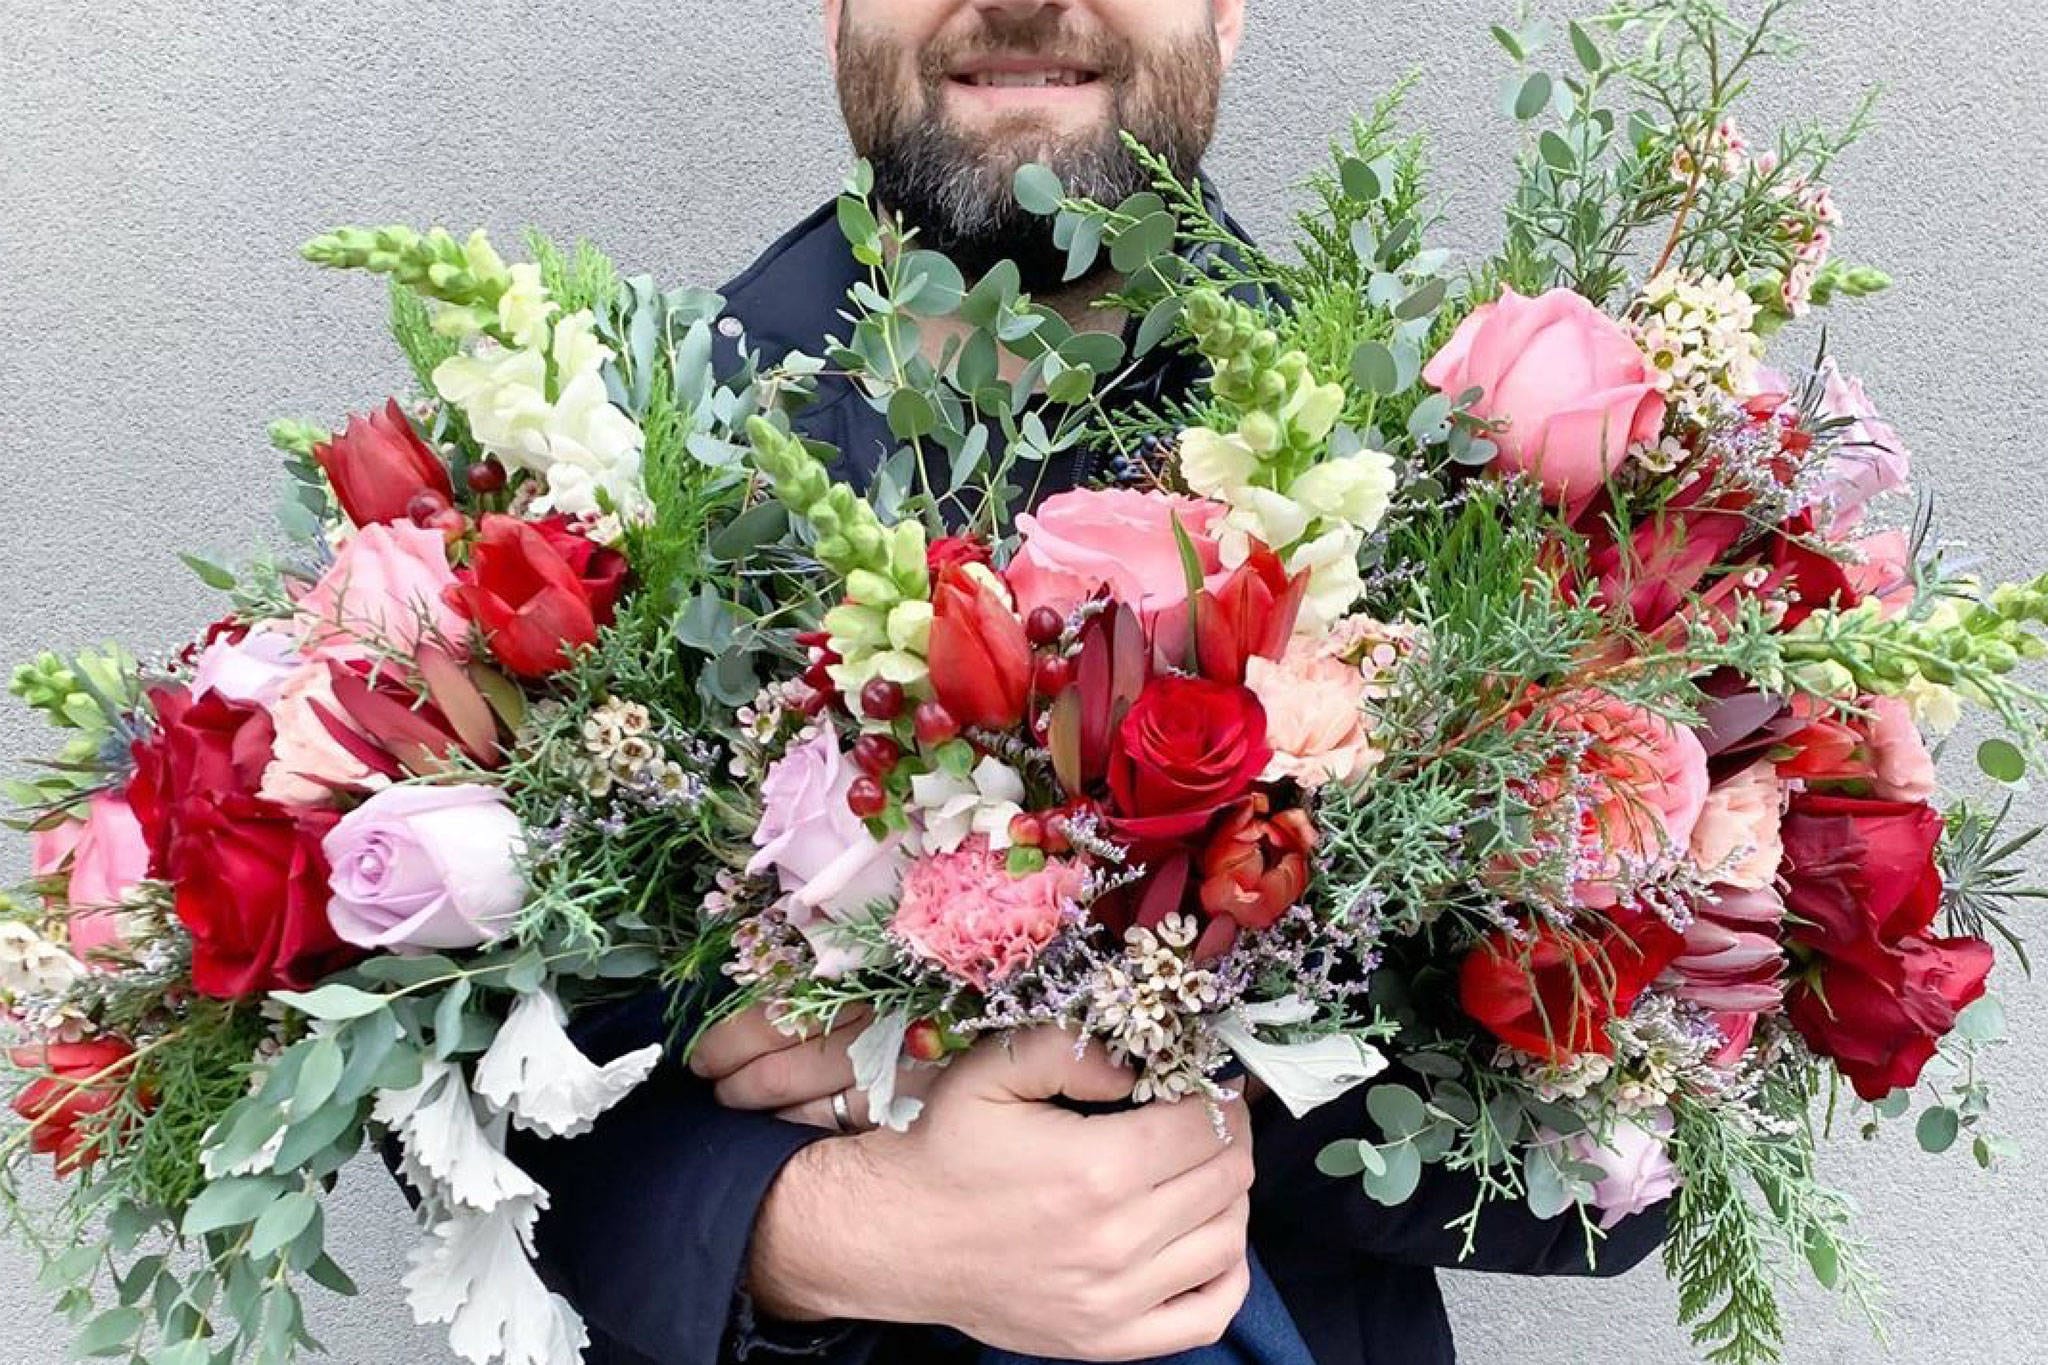 Toronto florist gets lambasted after being mistaken for another company